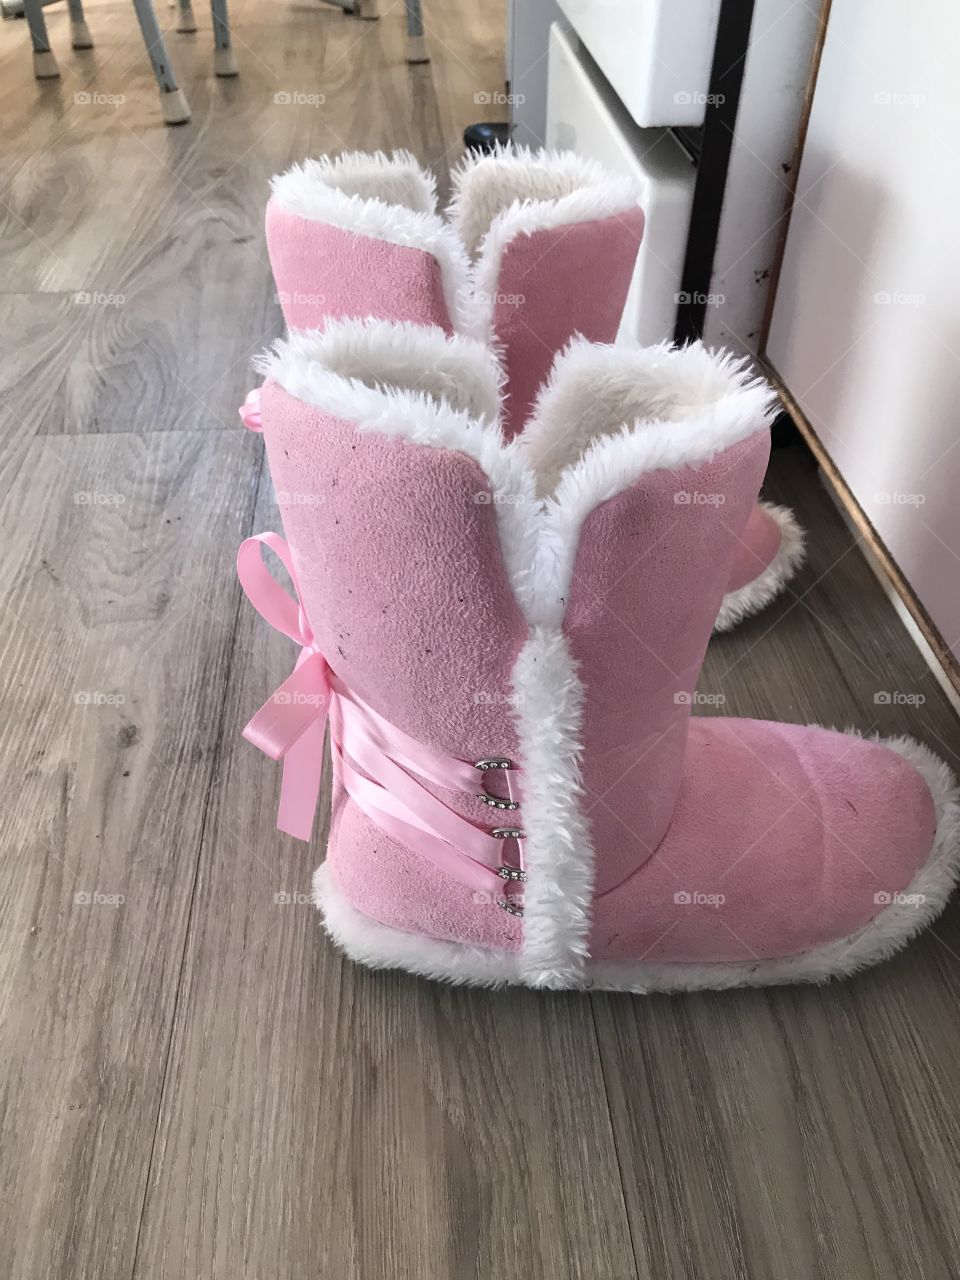 Cosy pink slippers